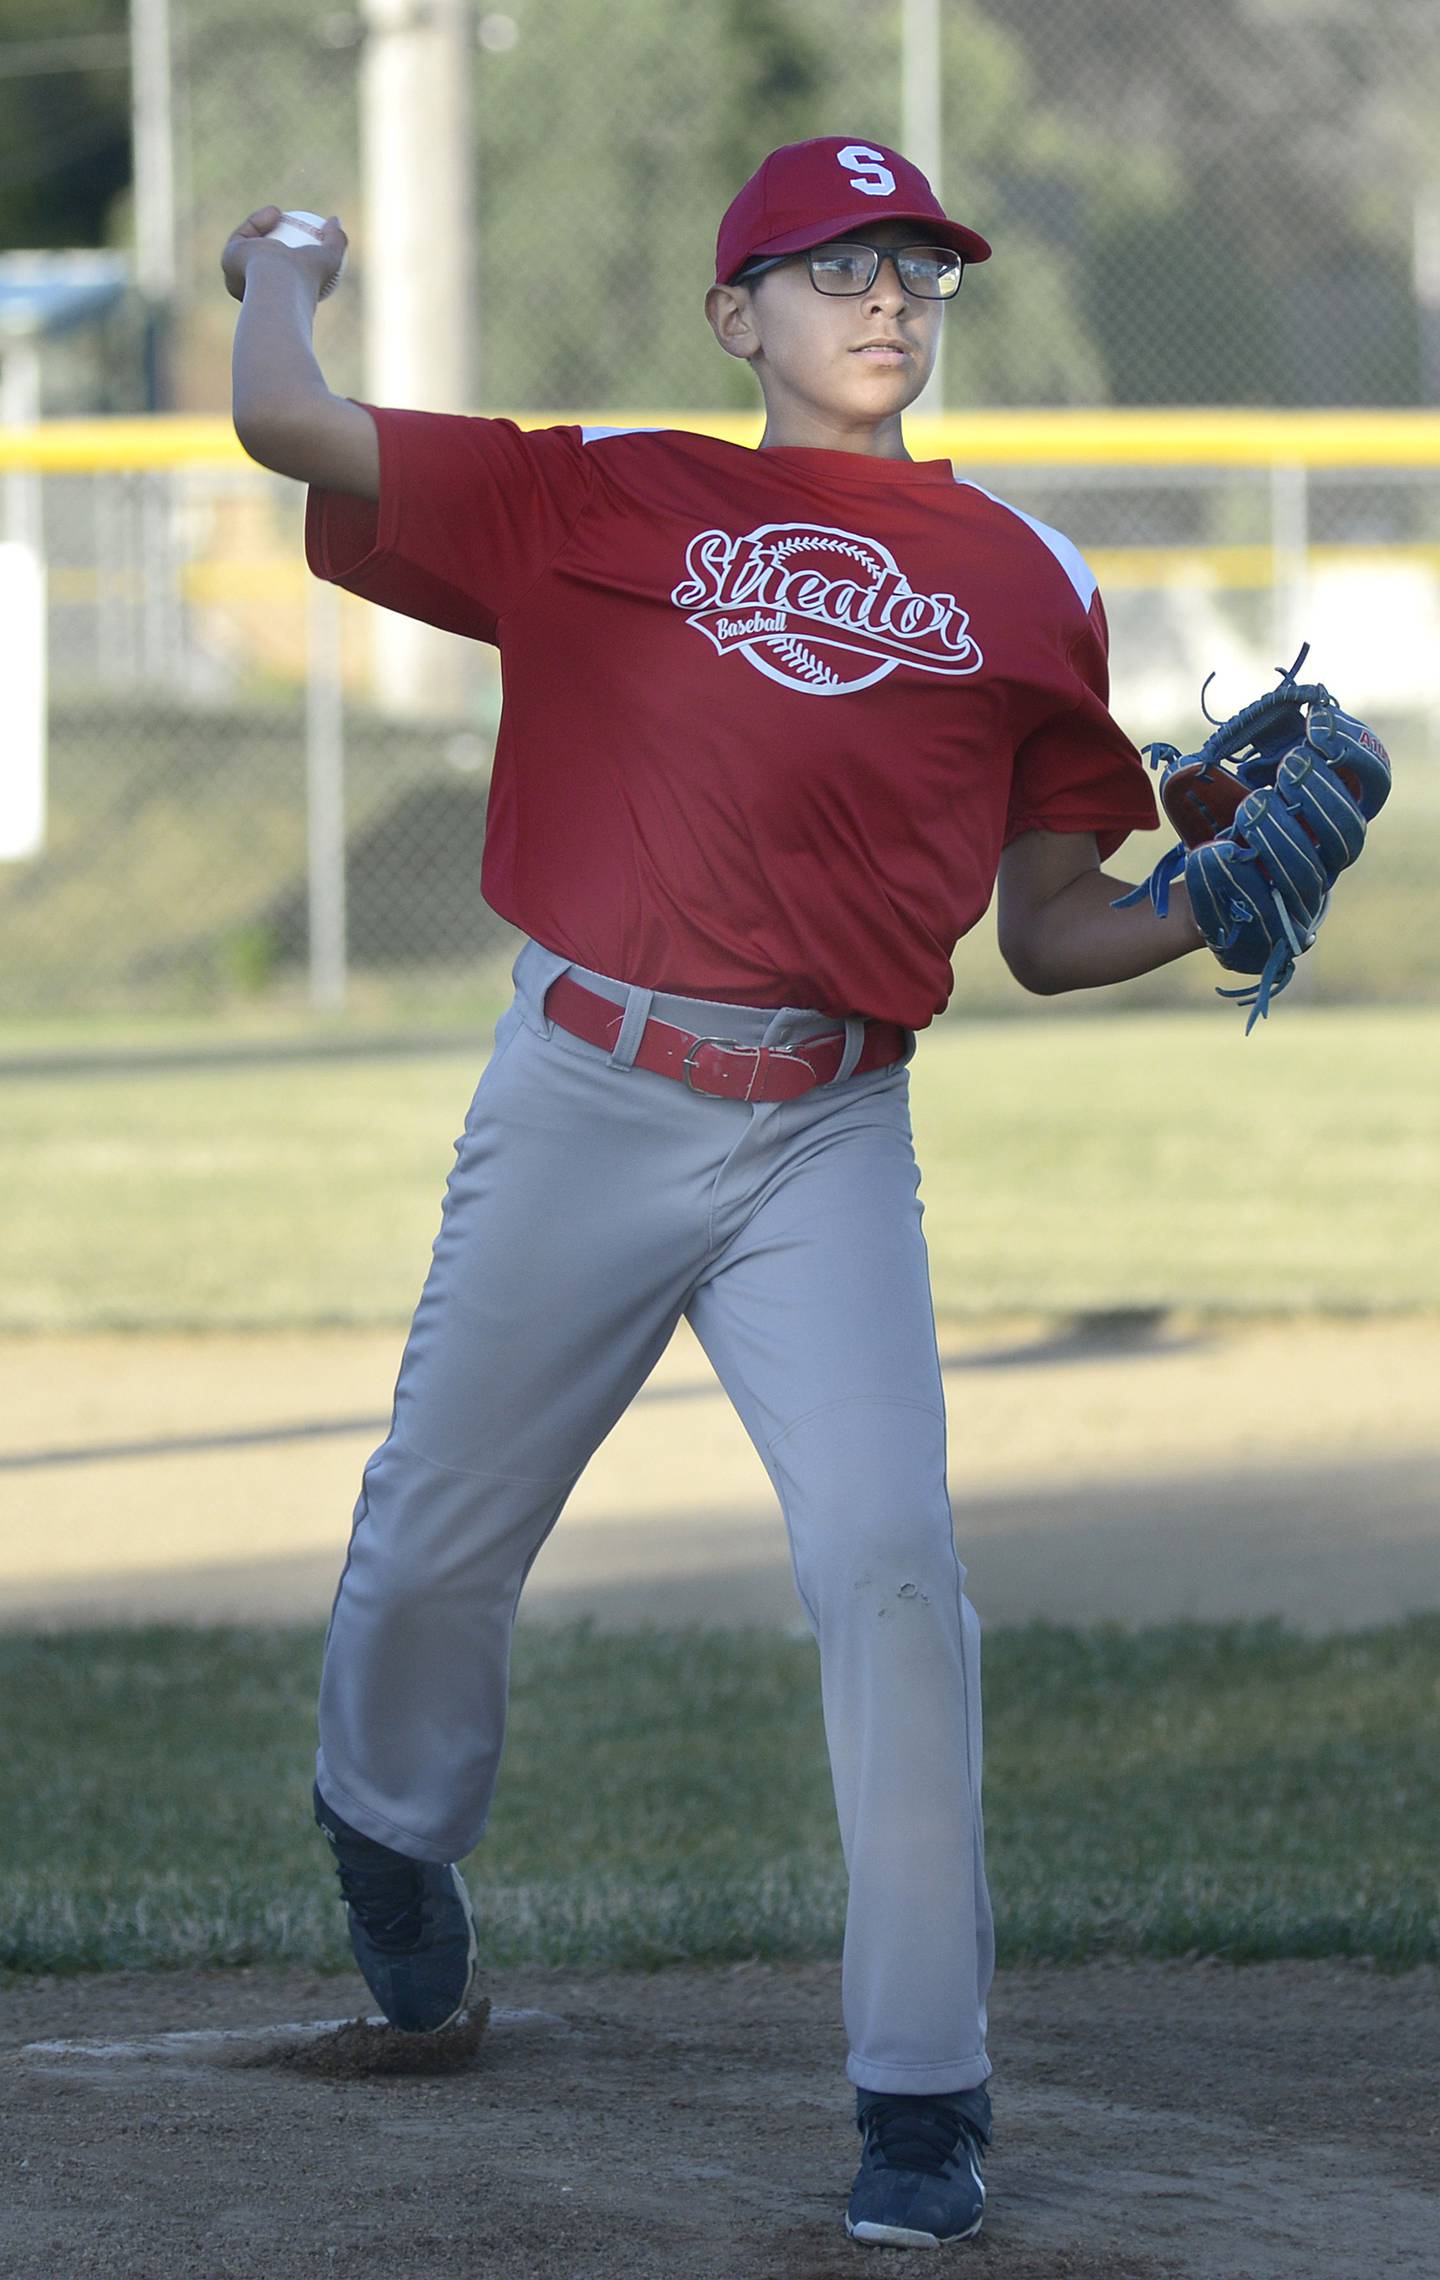 Streator Collision’s starting pitcher Ben Mascote lets go with a pitch against Hatzer & Son Wednesday during the championship game.